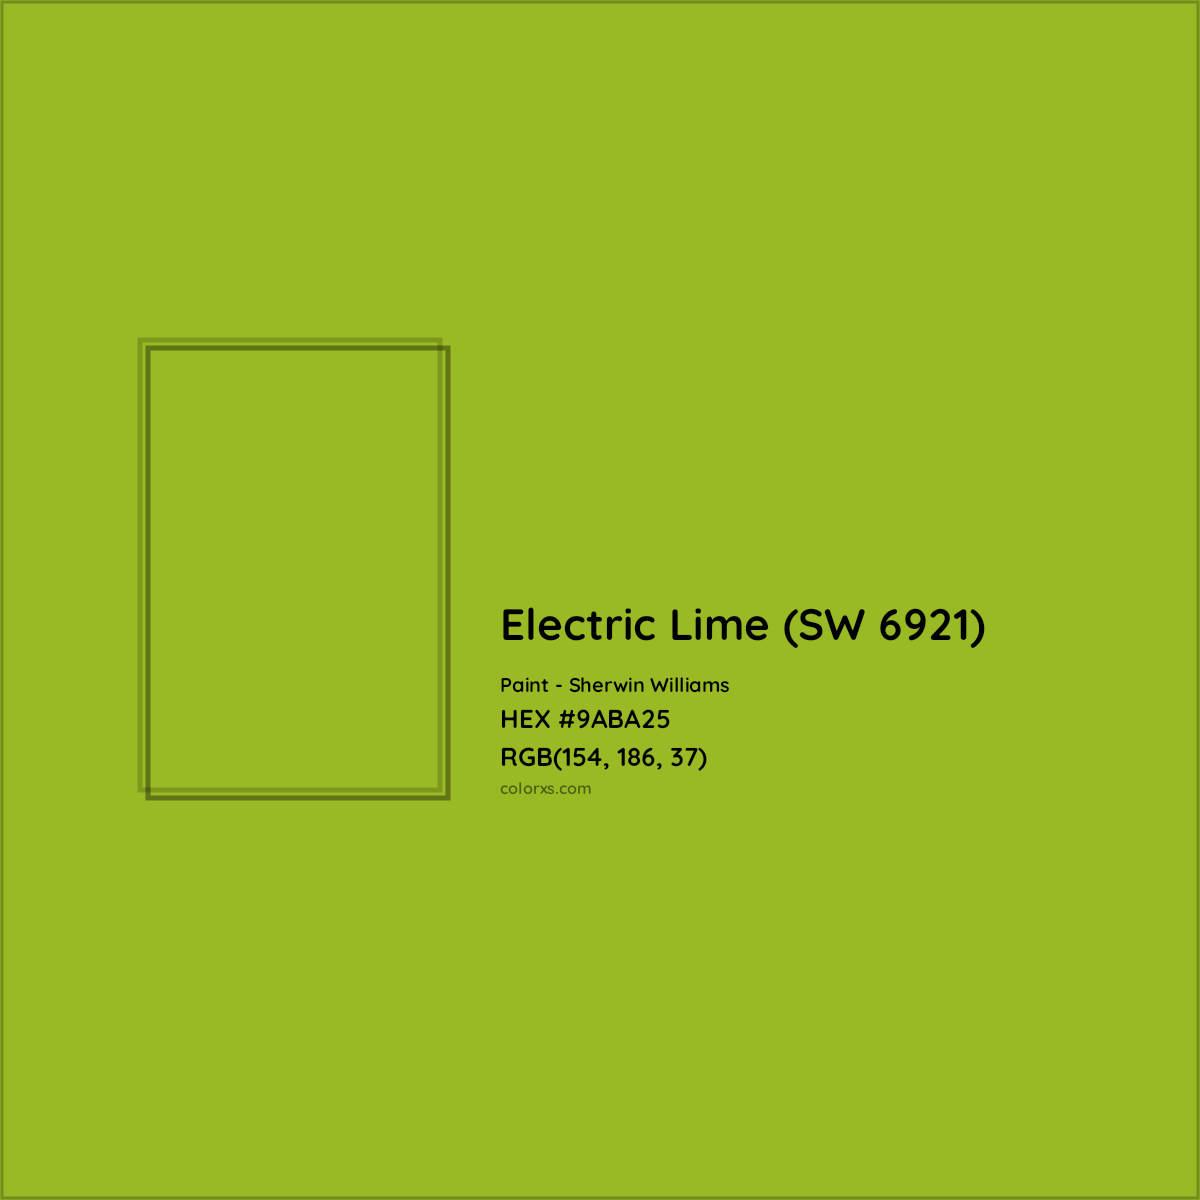 HEX #9ABA25 Electric Lime (SW 6921) Paint Sherwin Williams - Color Code